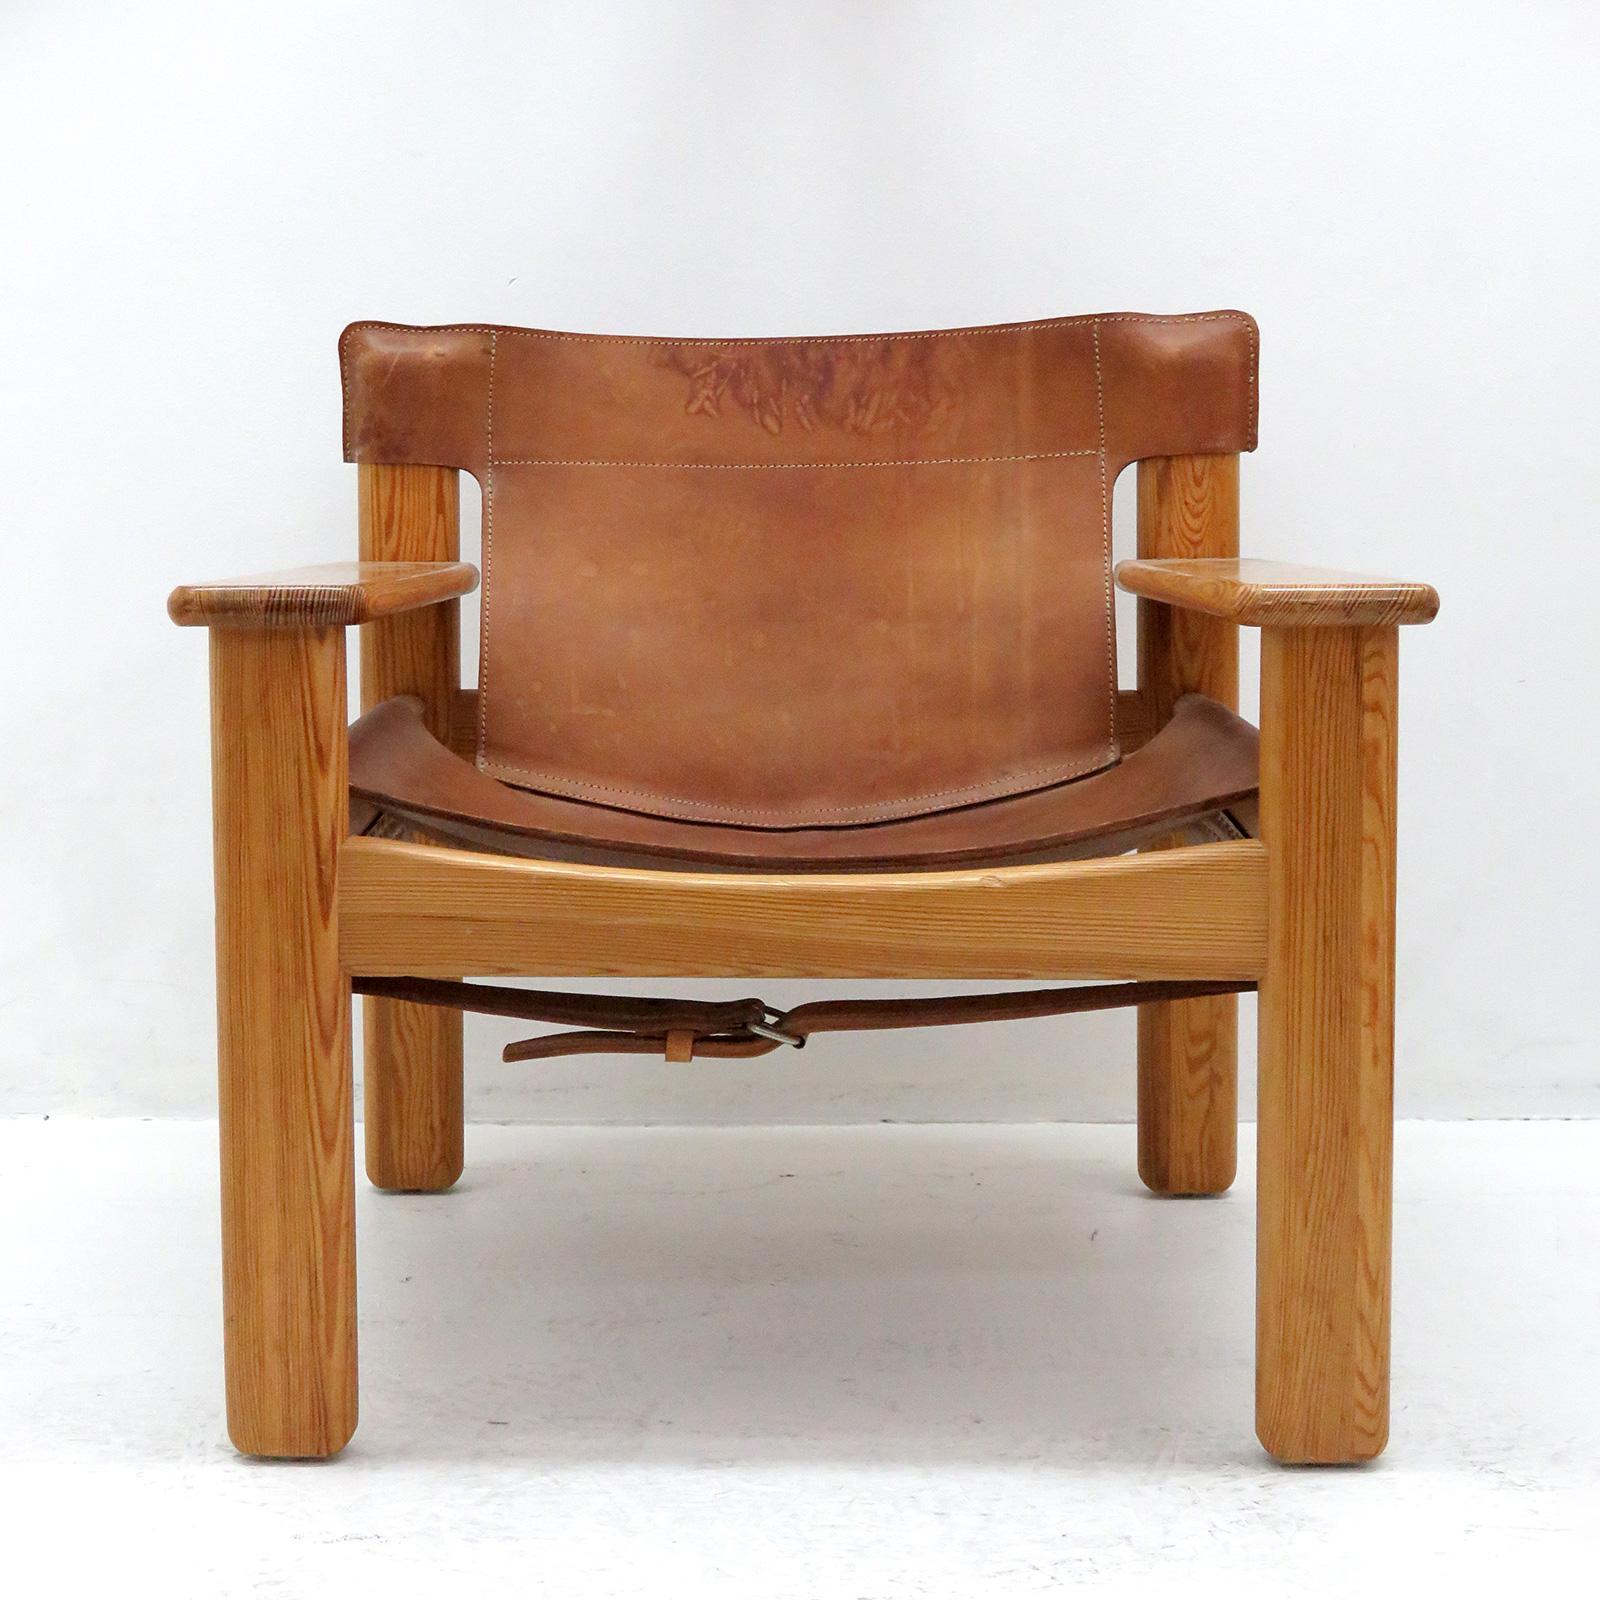 Bold and comfortable Danish modern lounge chair by Karin Mobring, Sweden, designed in 1977, oversized pine frame with thick cognac colored leather with incredible patina.